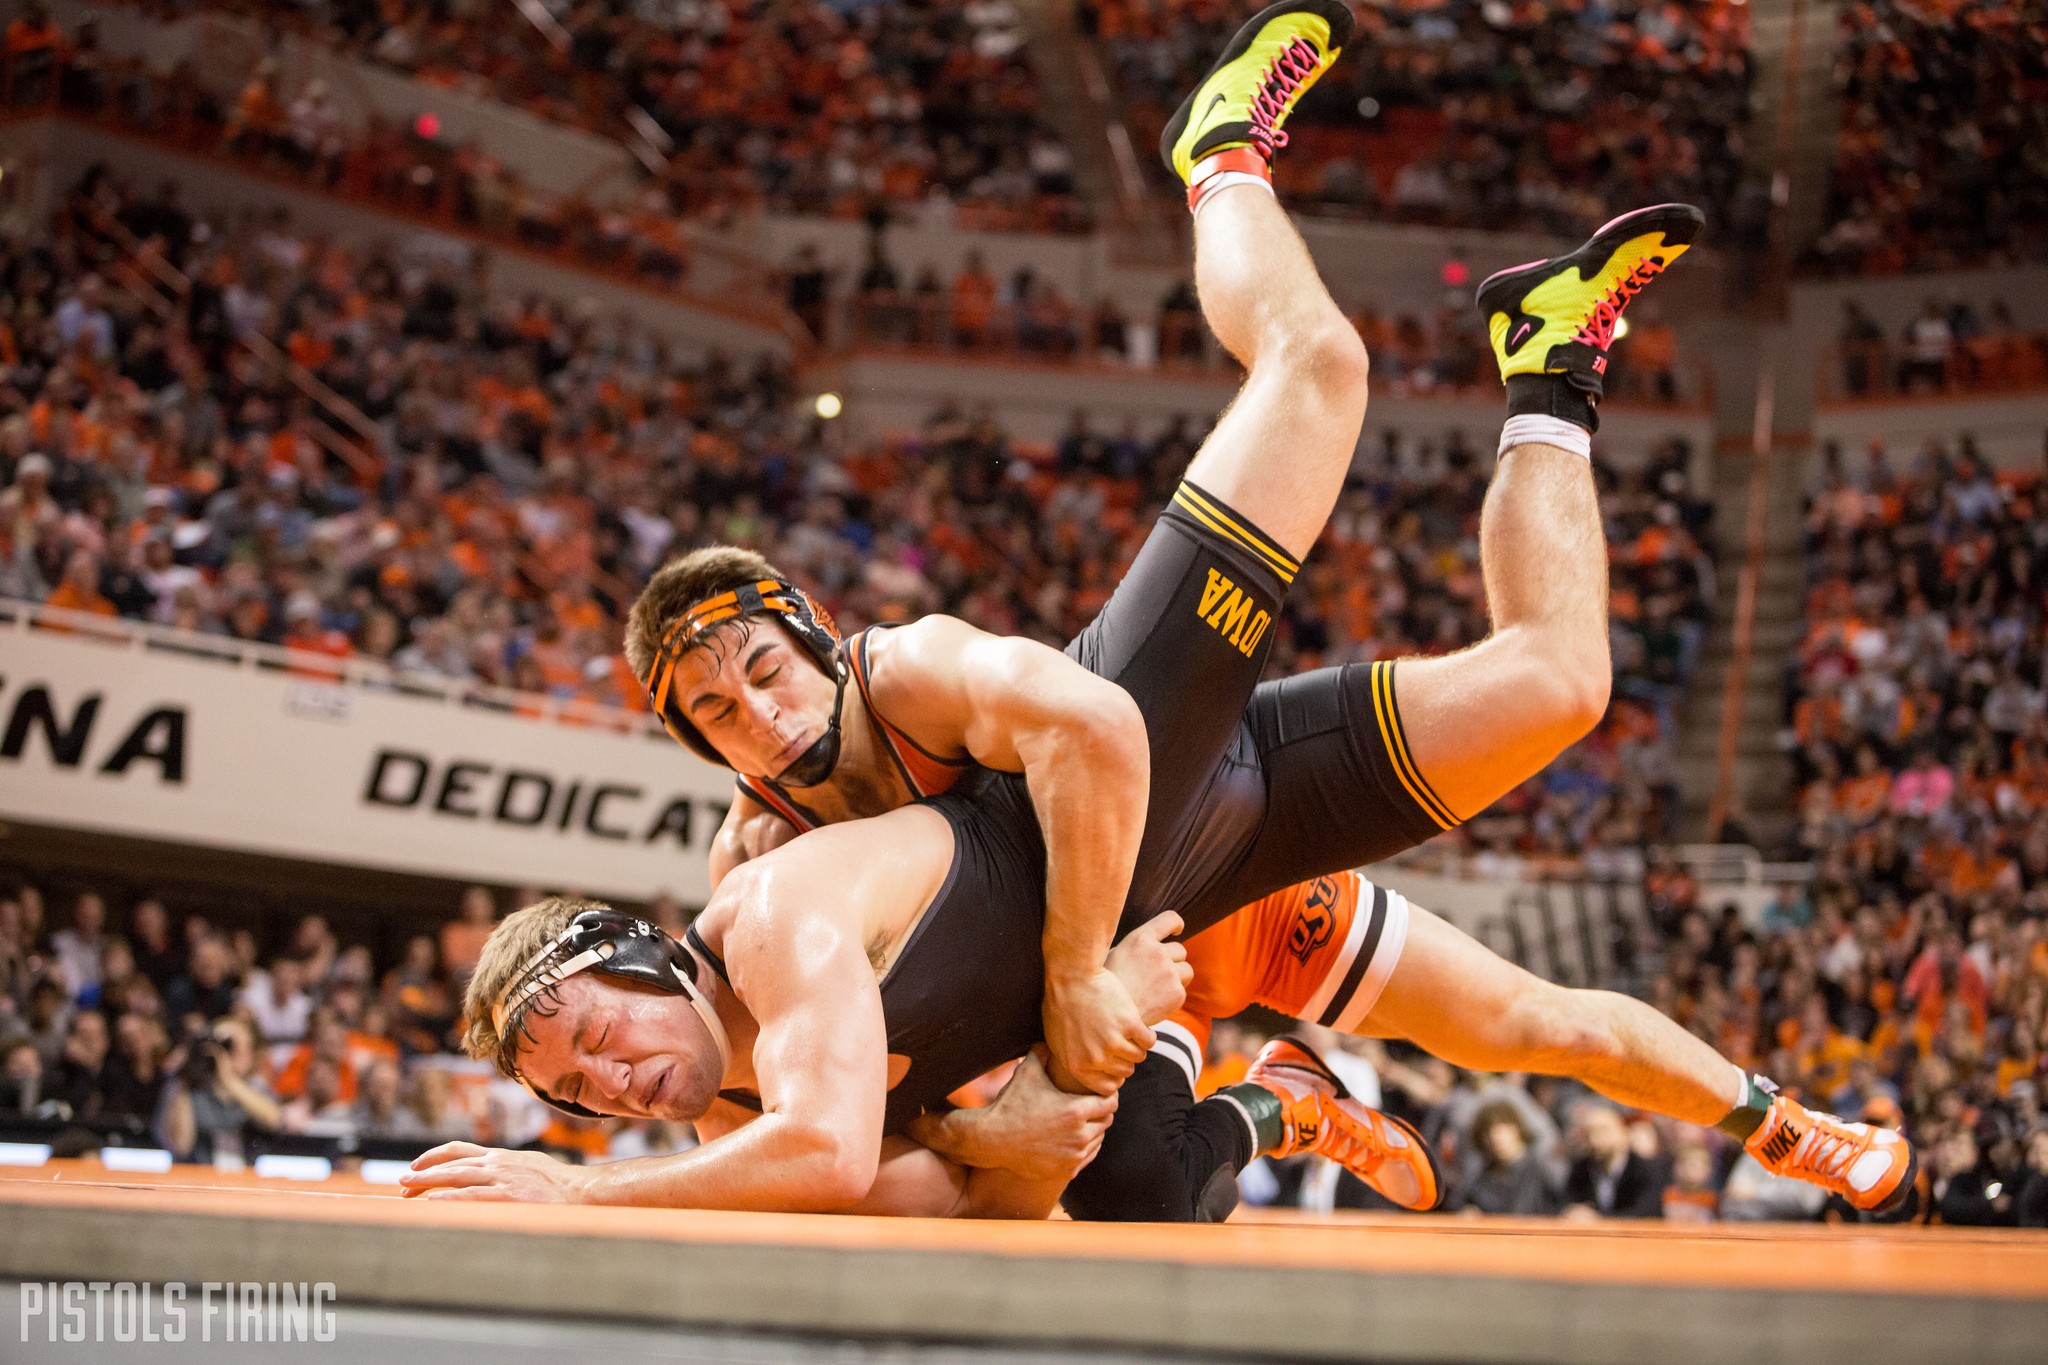 OSU Wrestling Goes 3-0 in Medal Matches to Finish 3rd